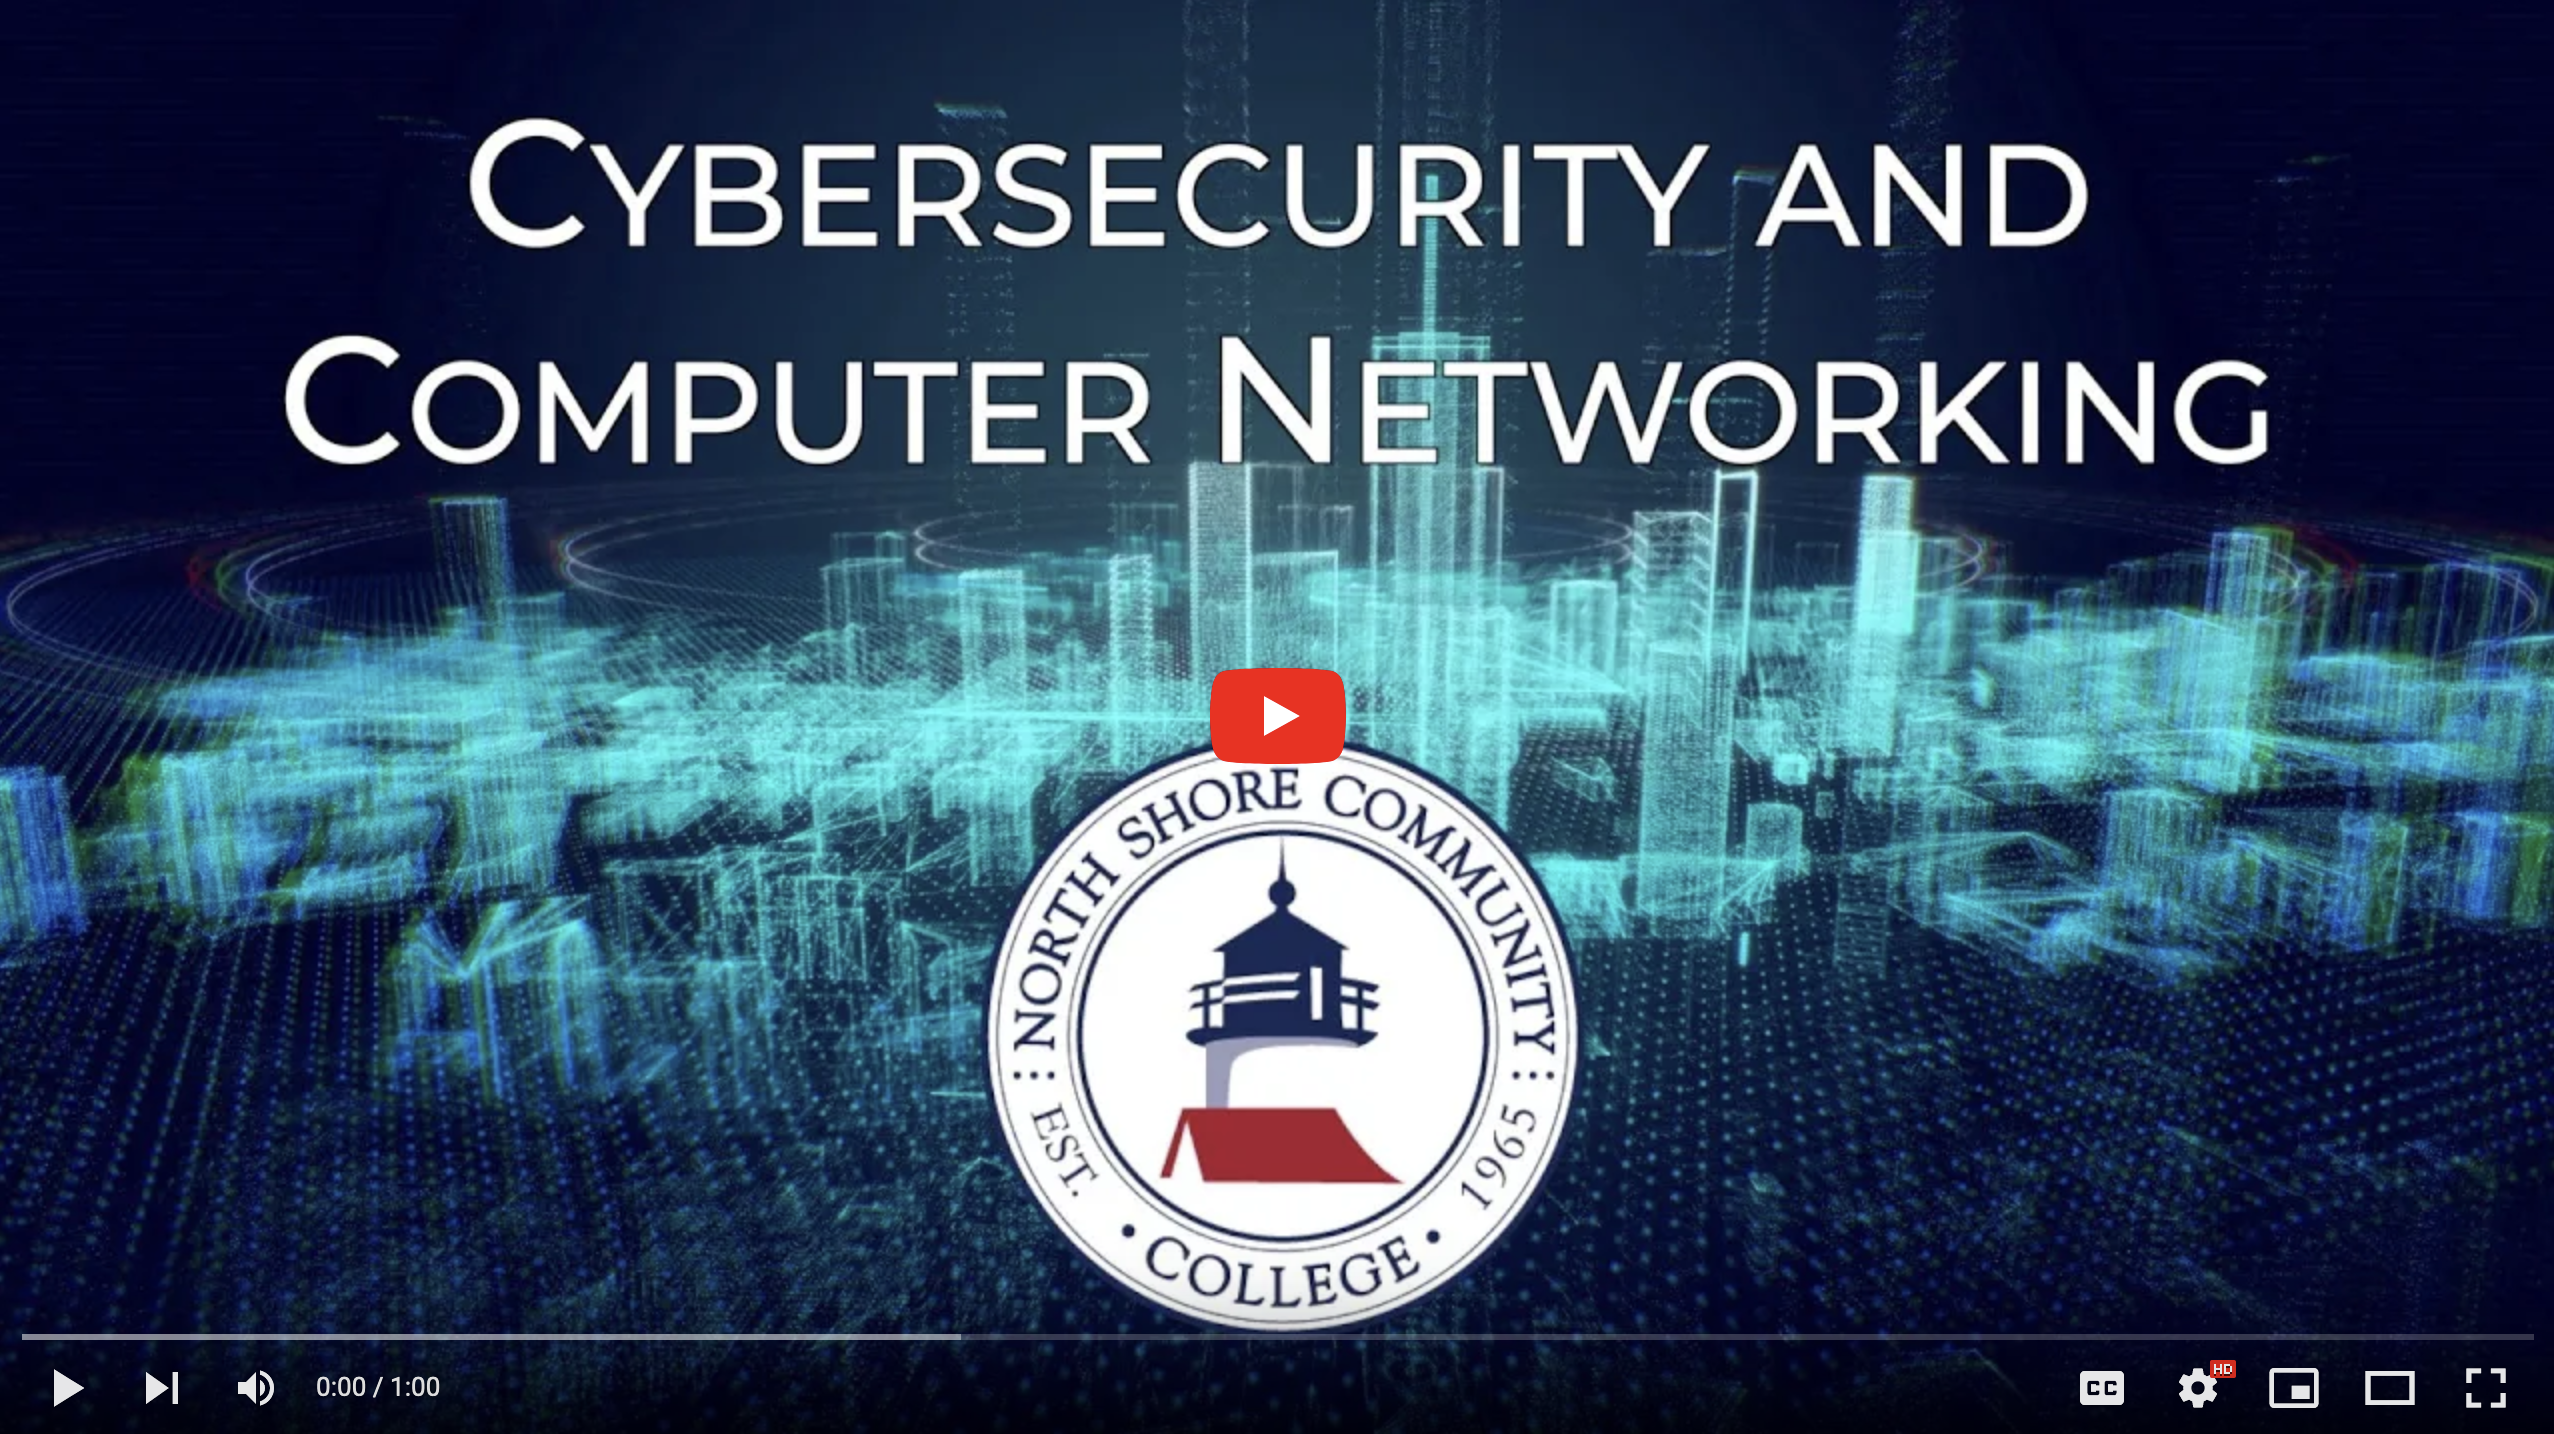 Cybersecurity and Computer Networking YouTube Video Thumbnail